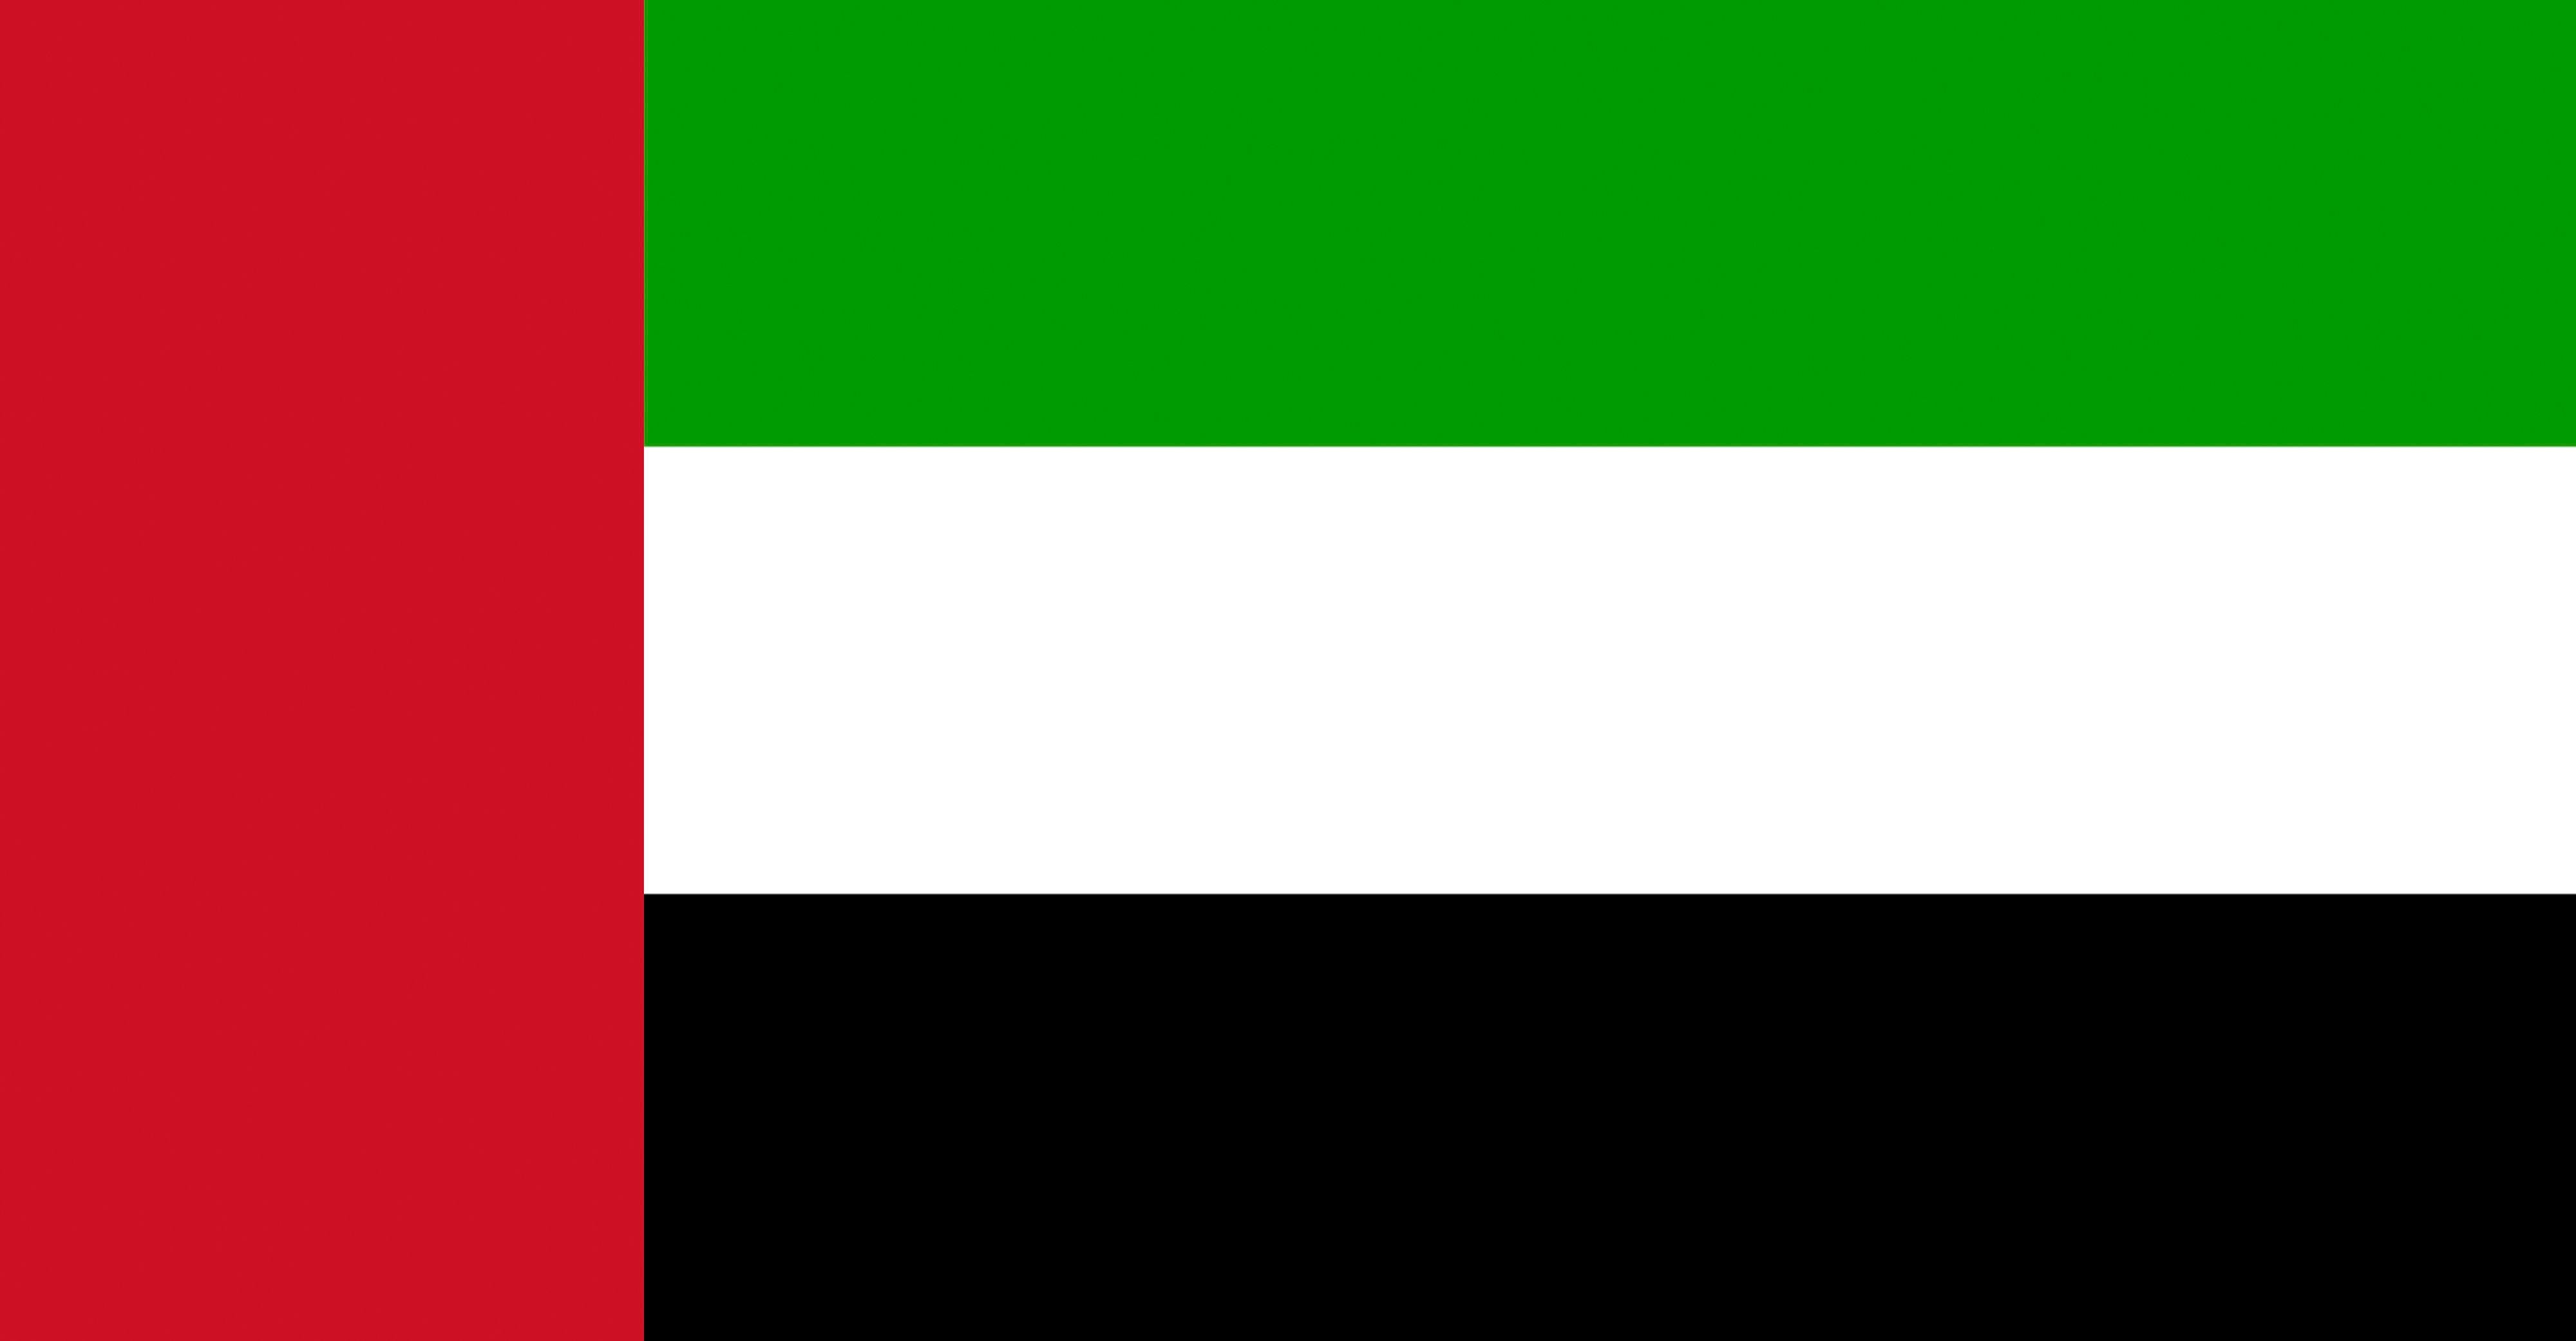 Why Iraq's and Syria's flags are so similar in appearance and what